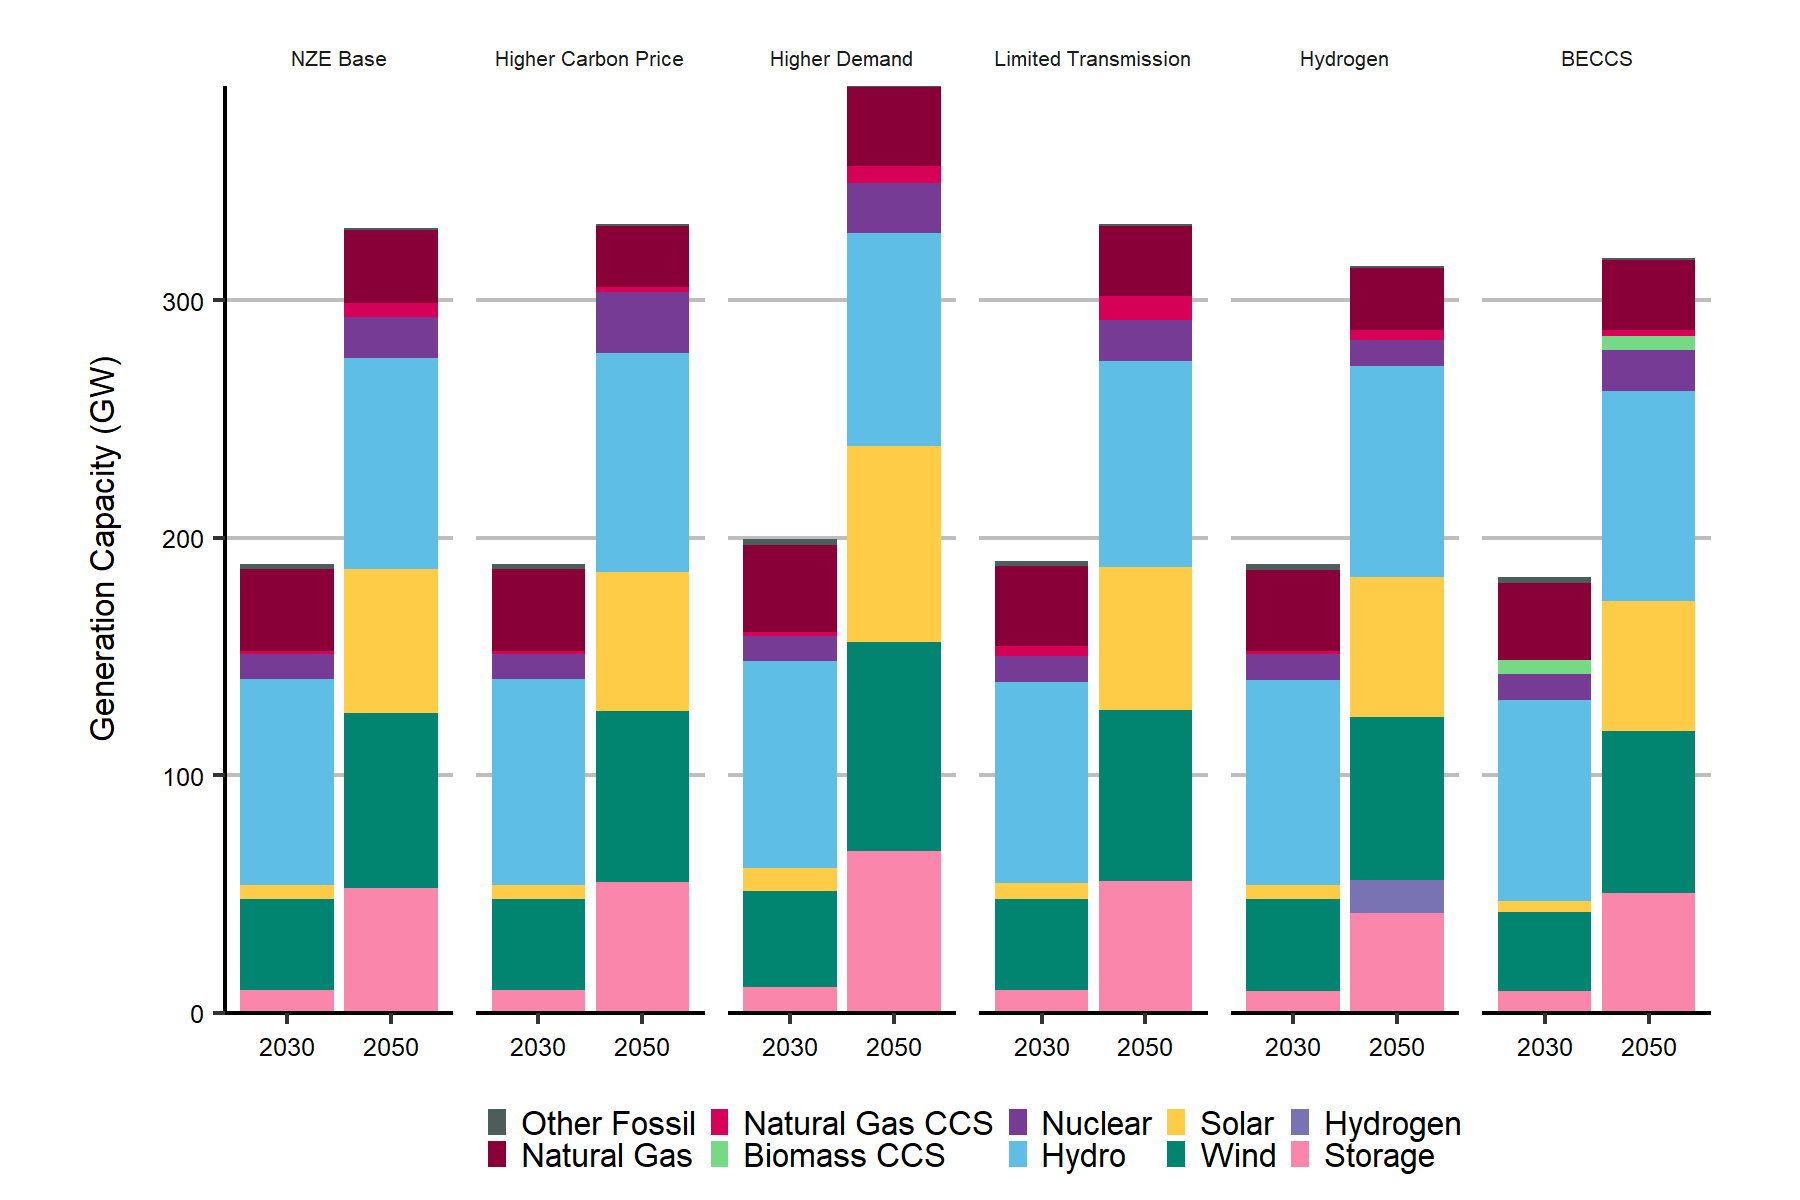 Installed Capacity by Technology in Different Scenarios